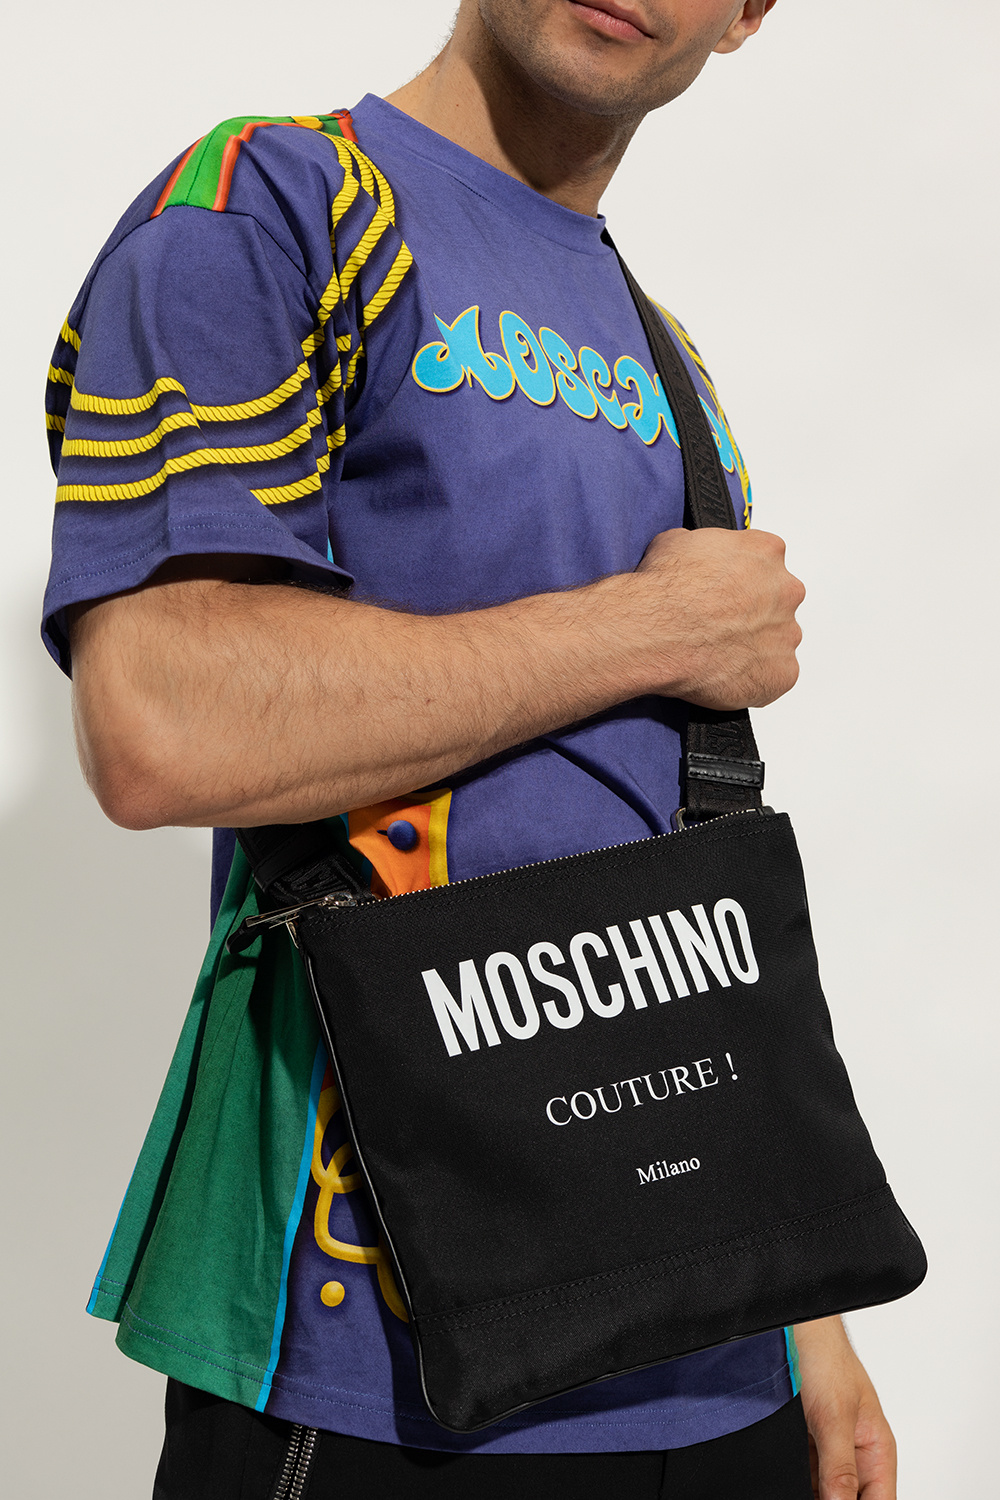 Moschino This navy blue bag is typical of Japanese label